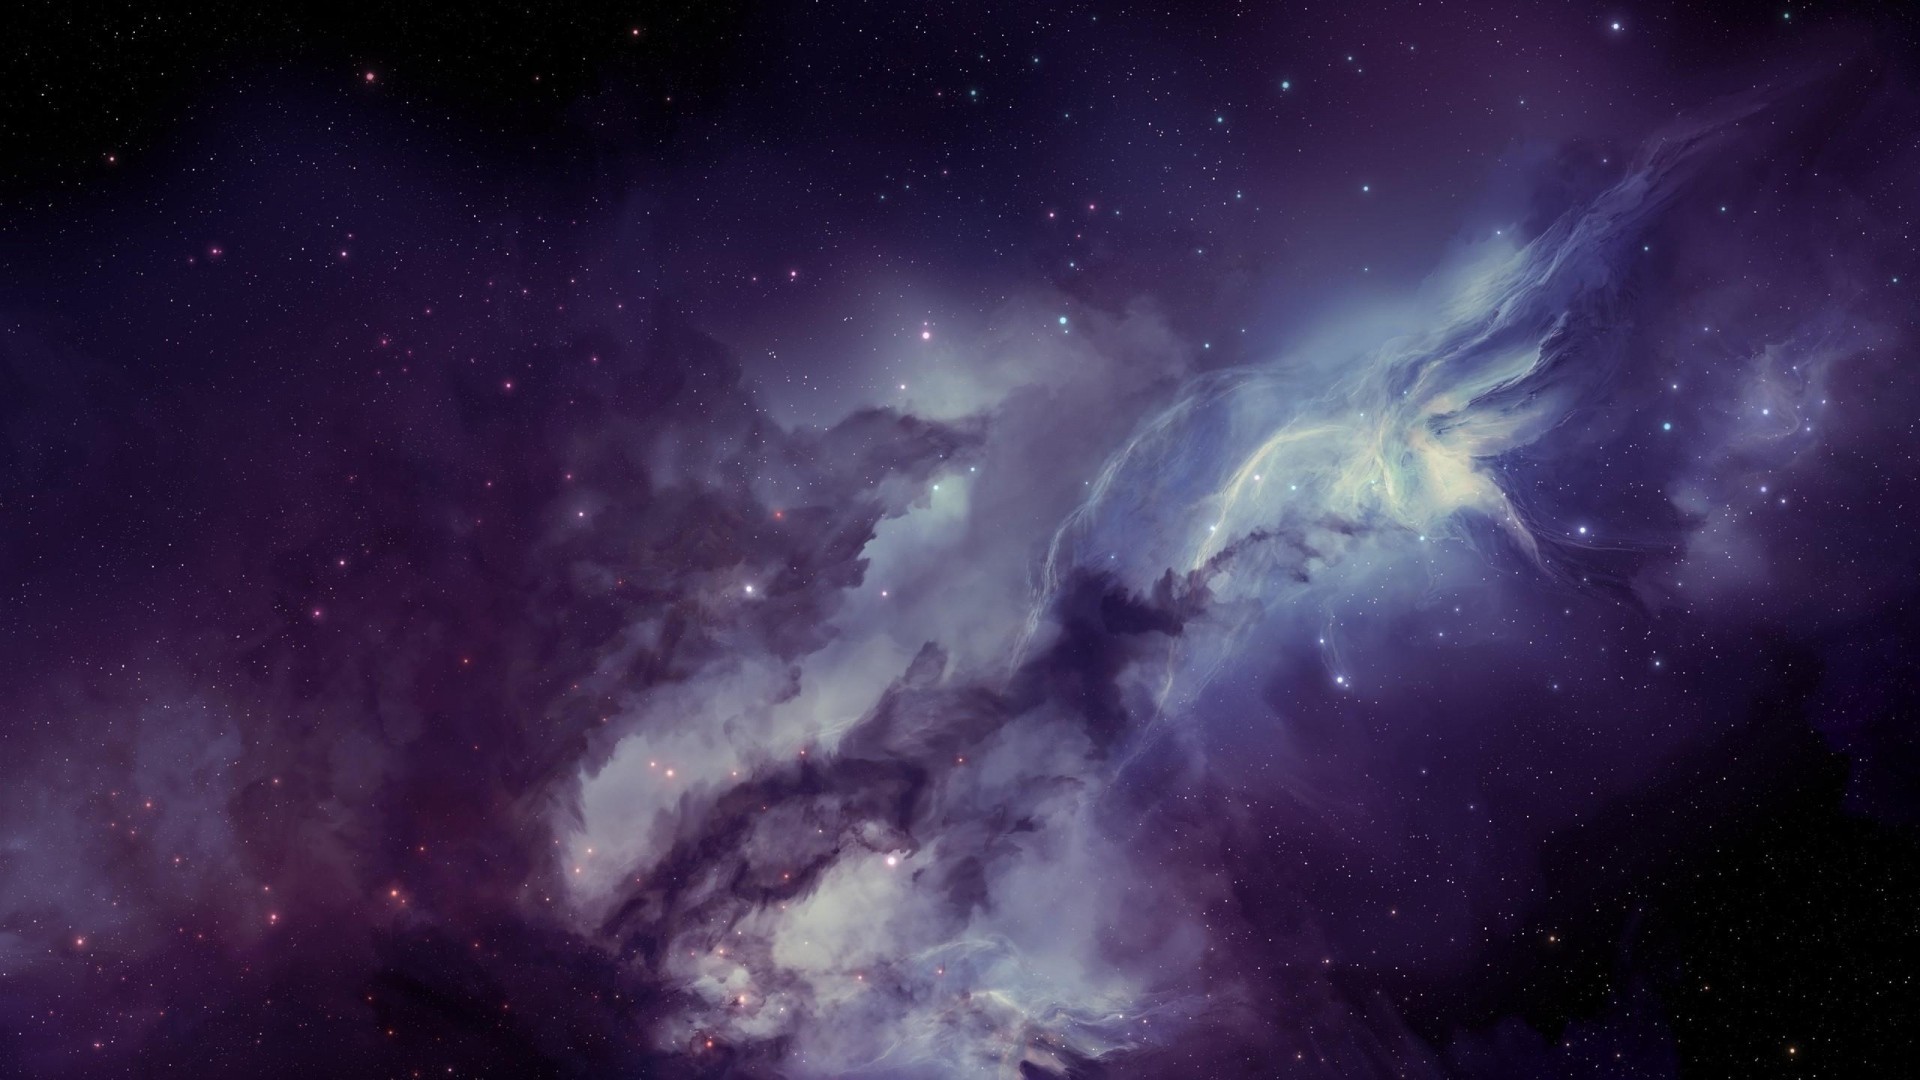 Galaxy wallpaper HD ·① Download free awesome HD wallpapers for desktop